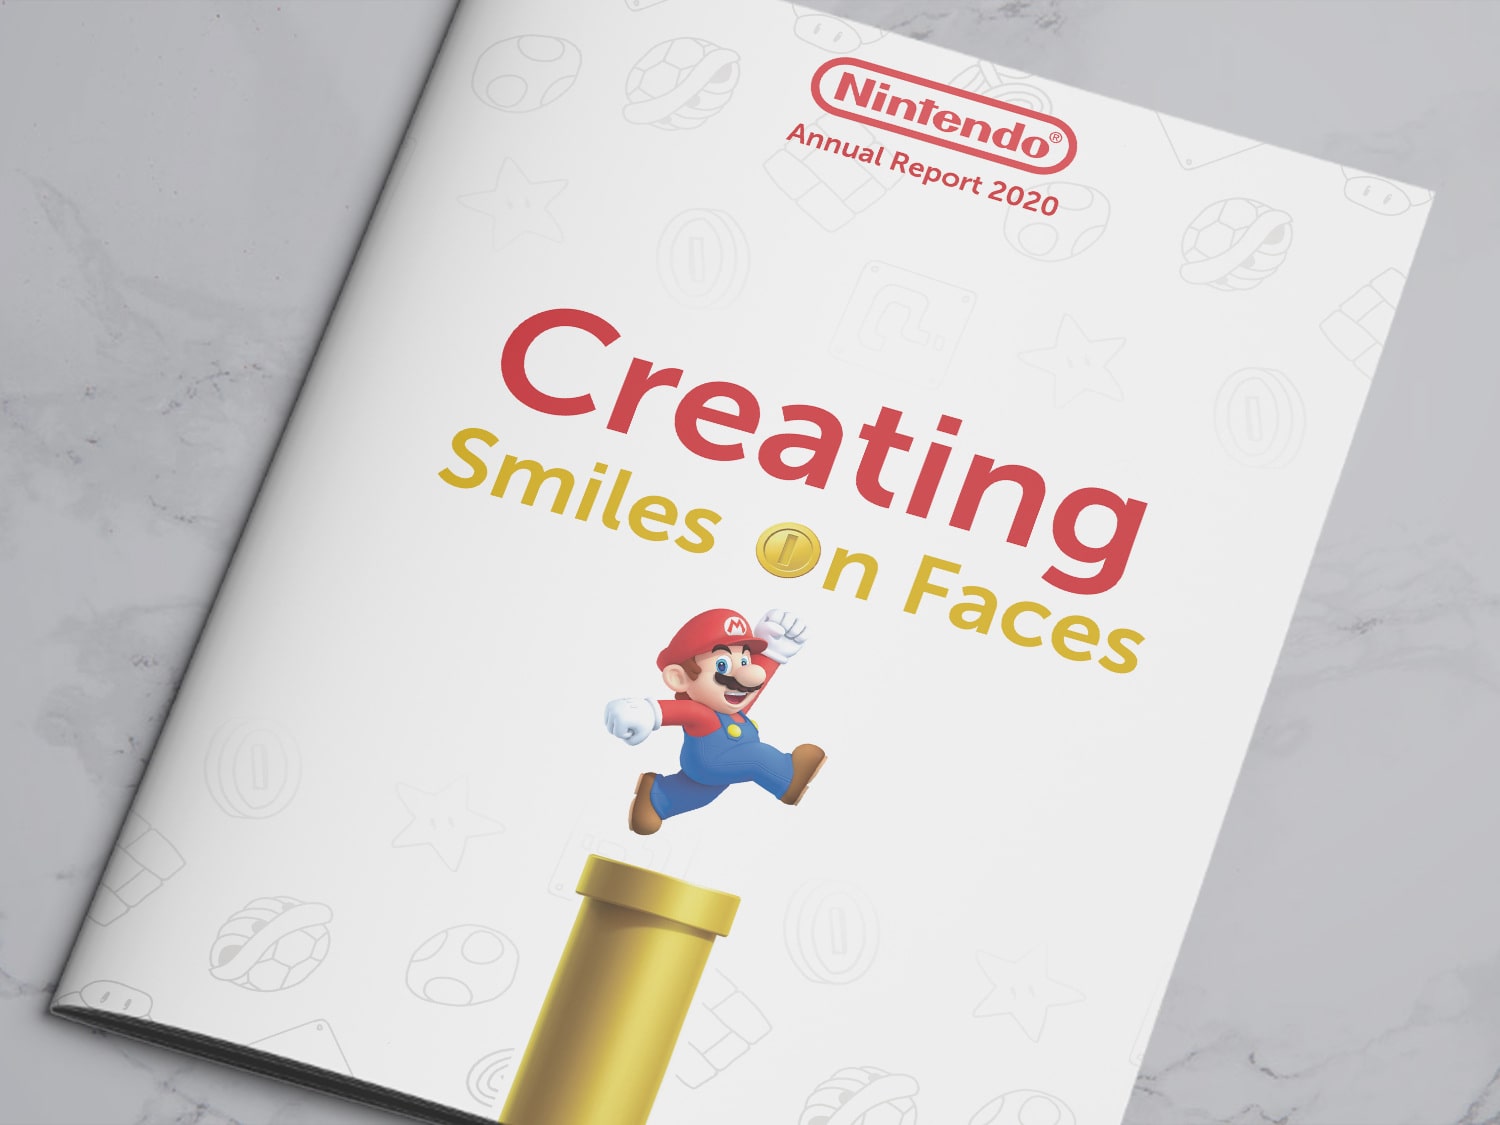 Nintendo Annual Report Page 2